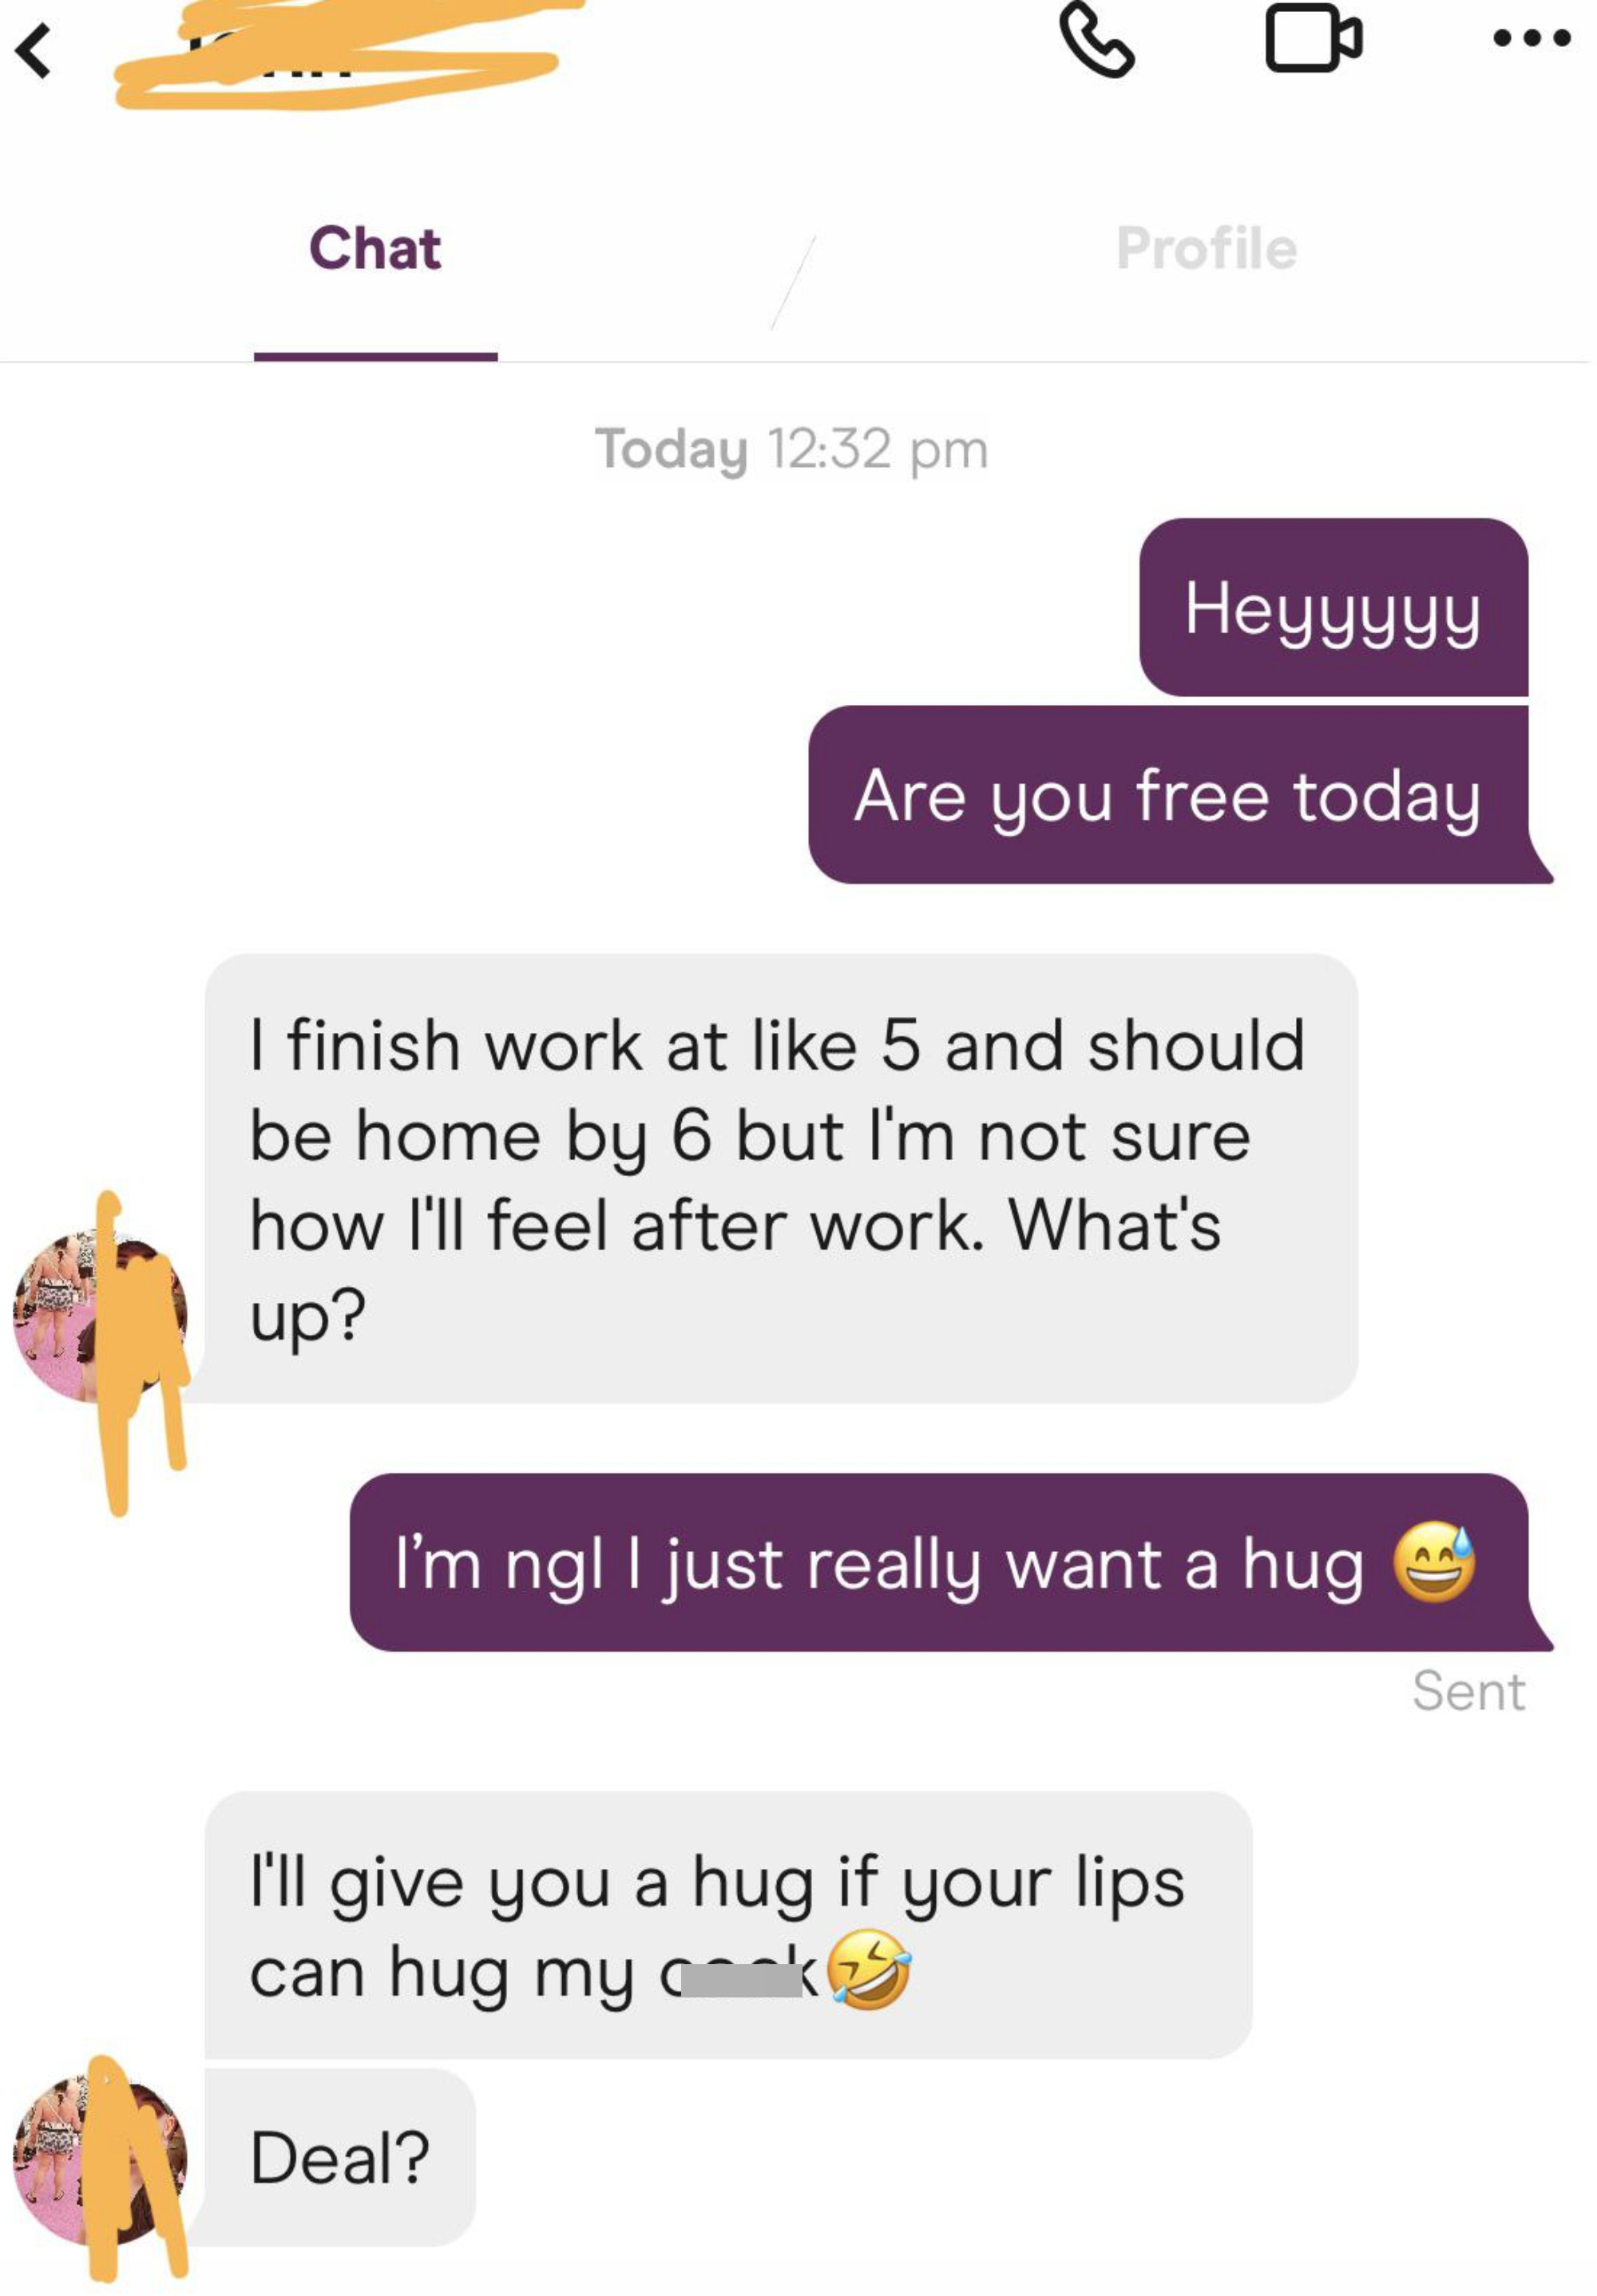 &quot;I&#x27;ll give you a hug if your lips can hug my ****&quot;